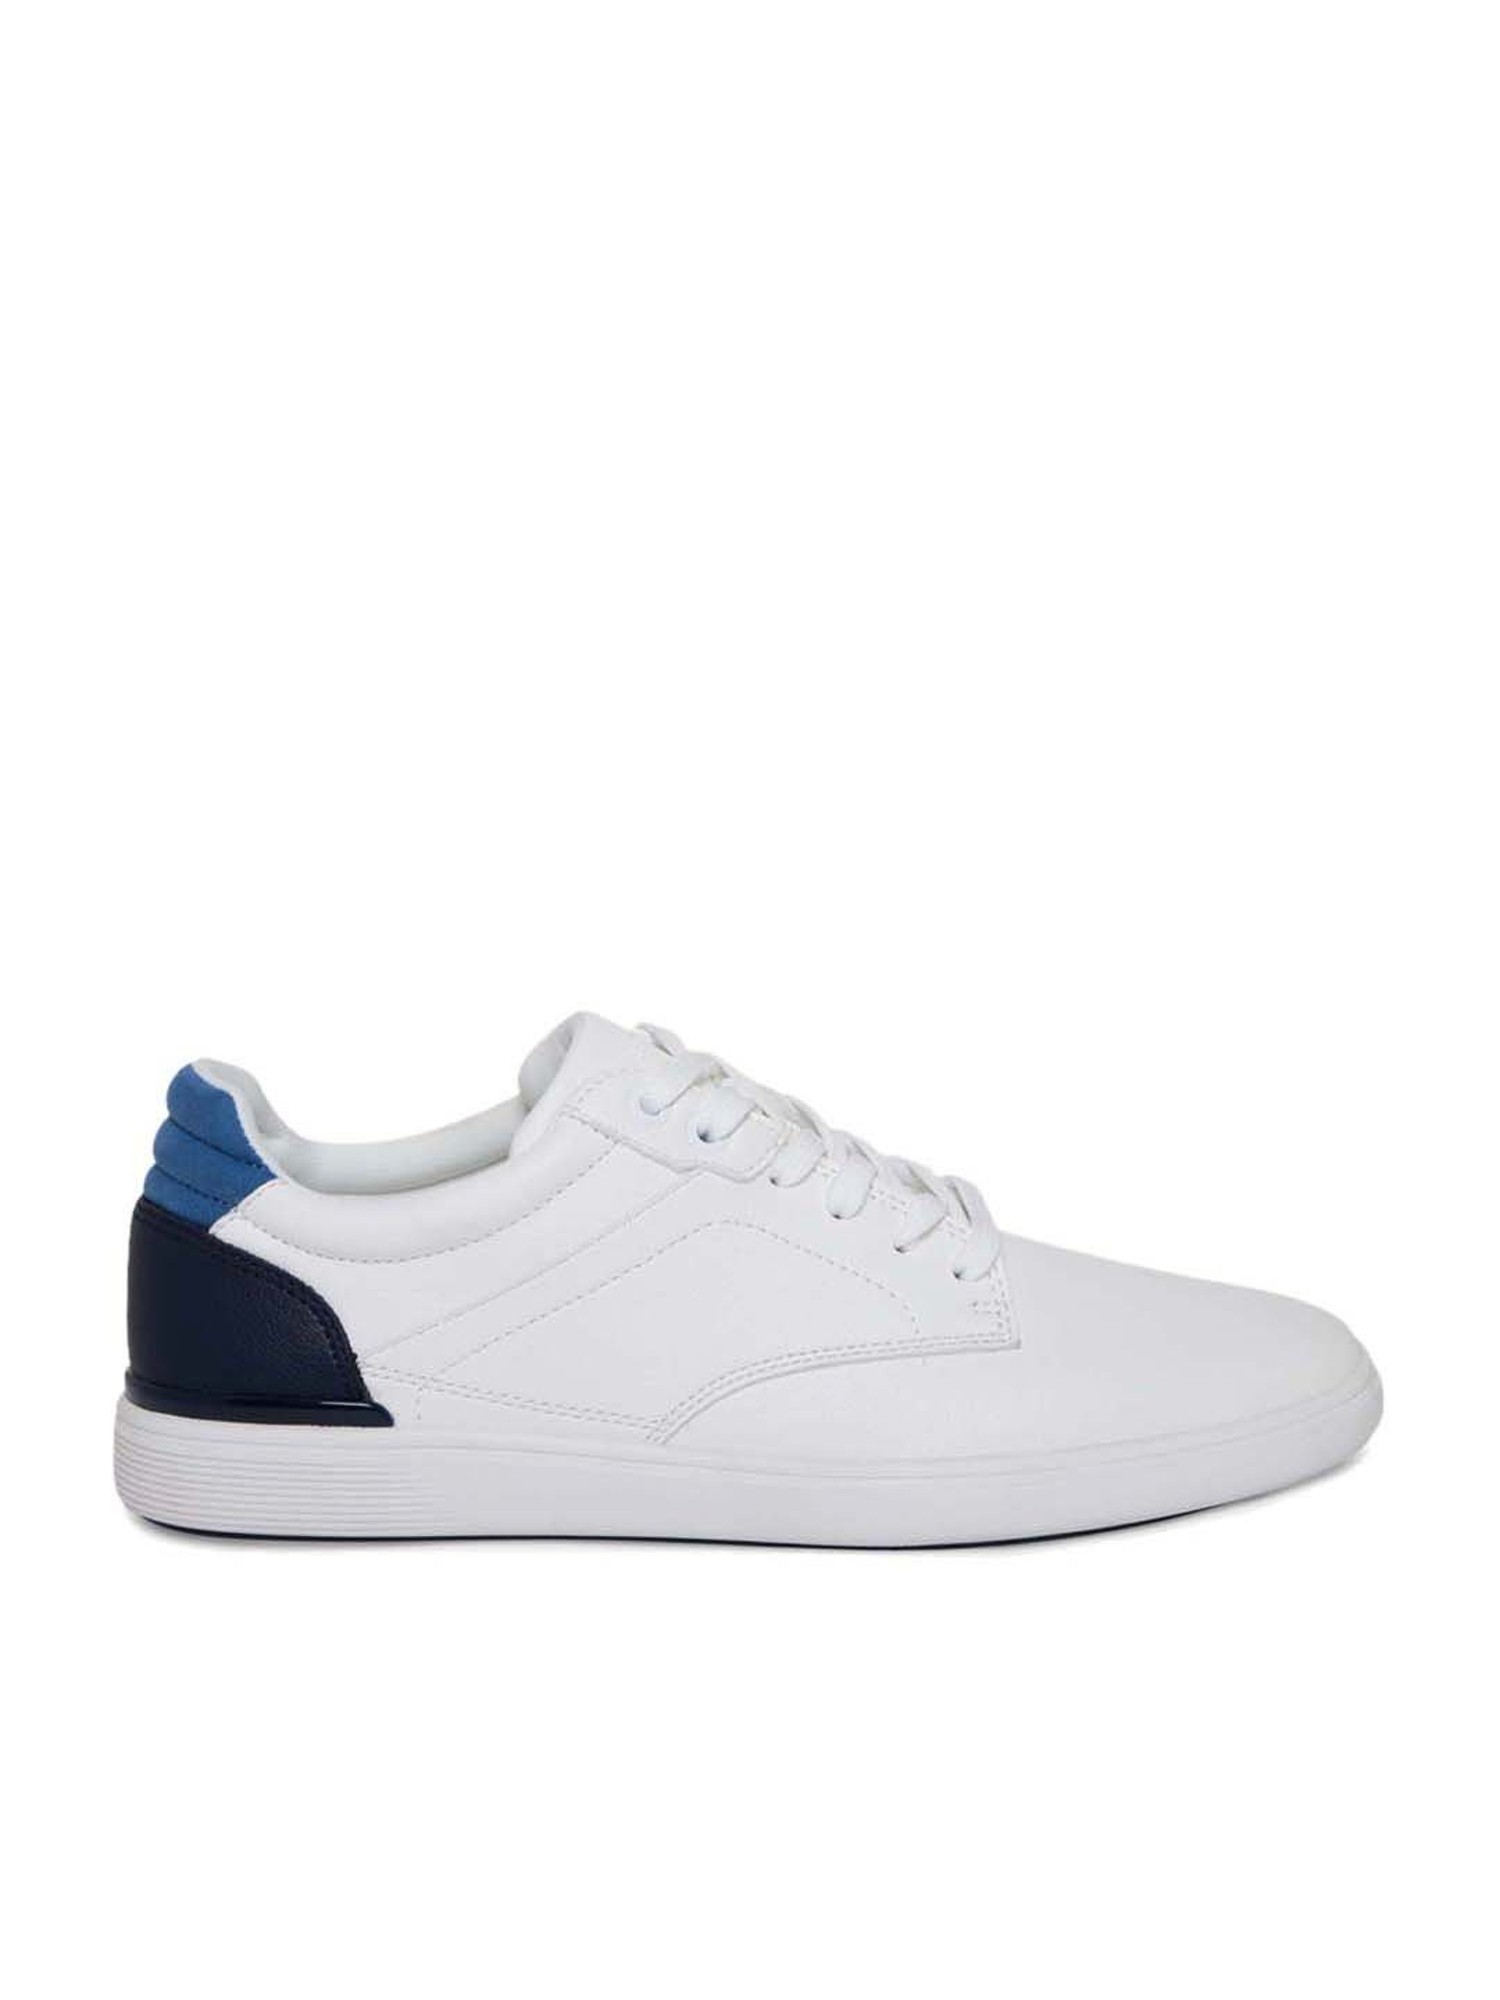 Buy HIGHLANDER- Men White Solid Sneakers online from Men's Fashionable Club-sonxechinhhang.vn